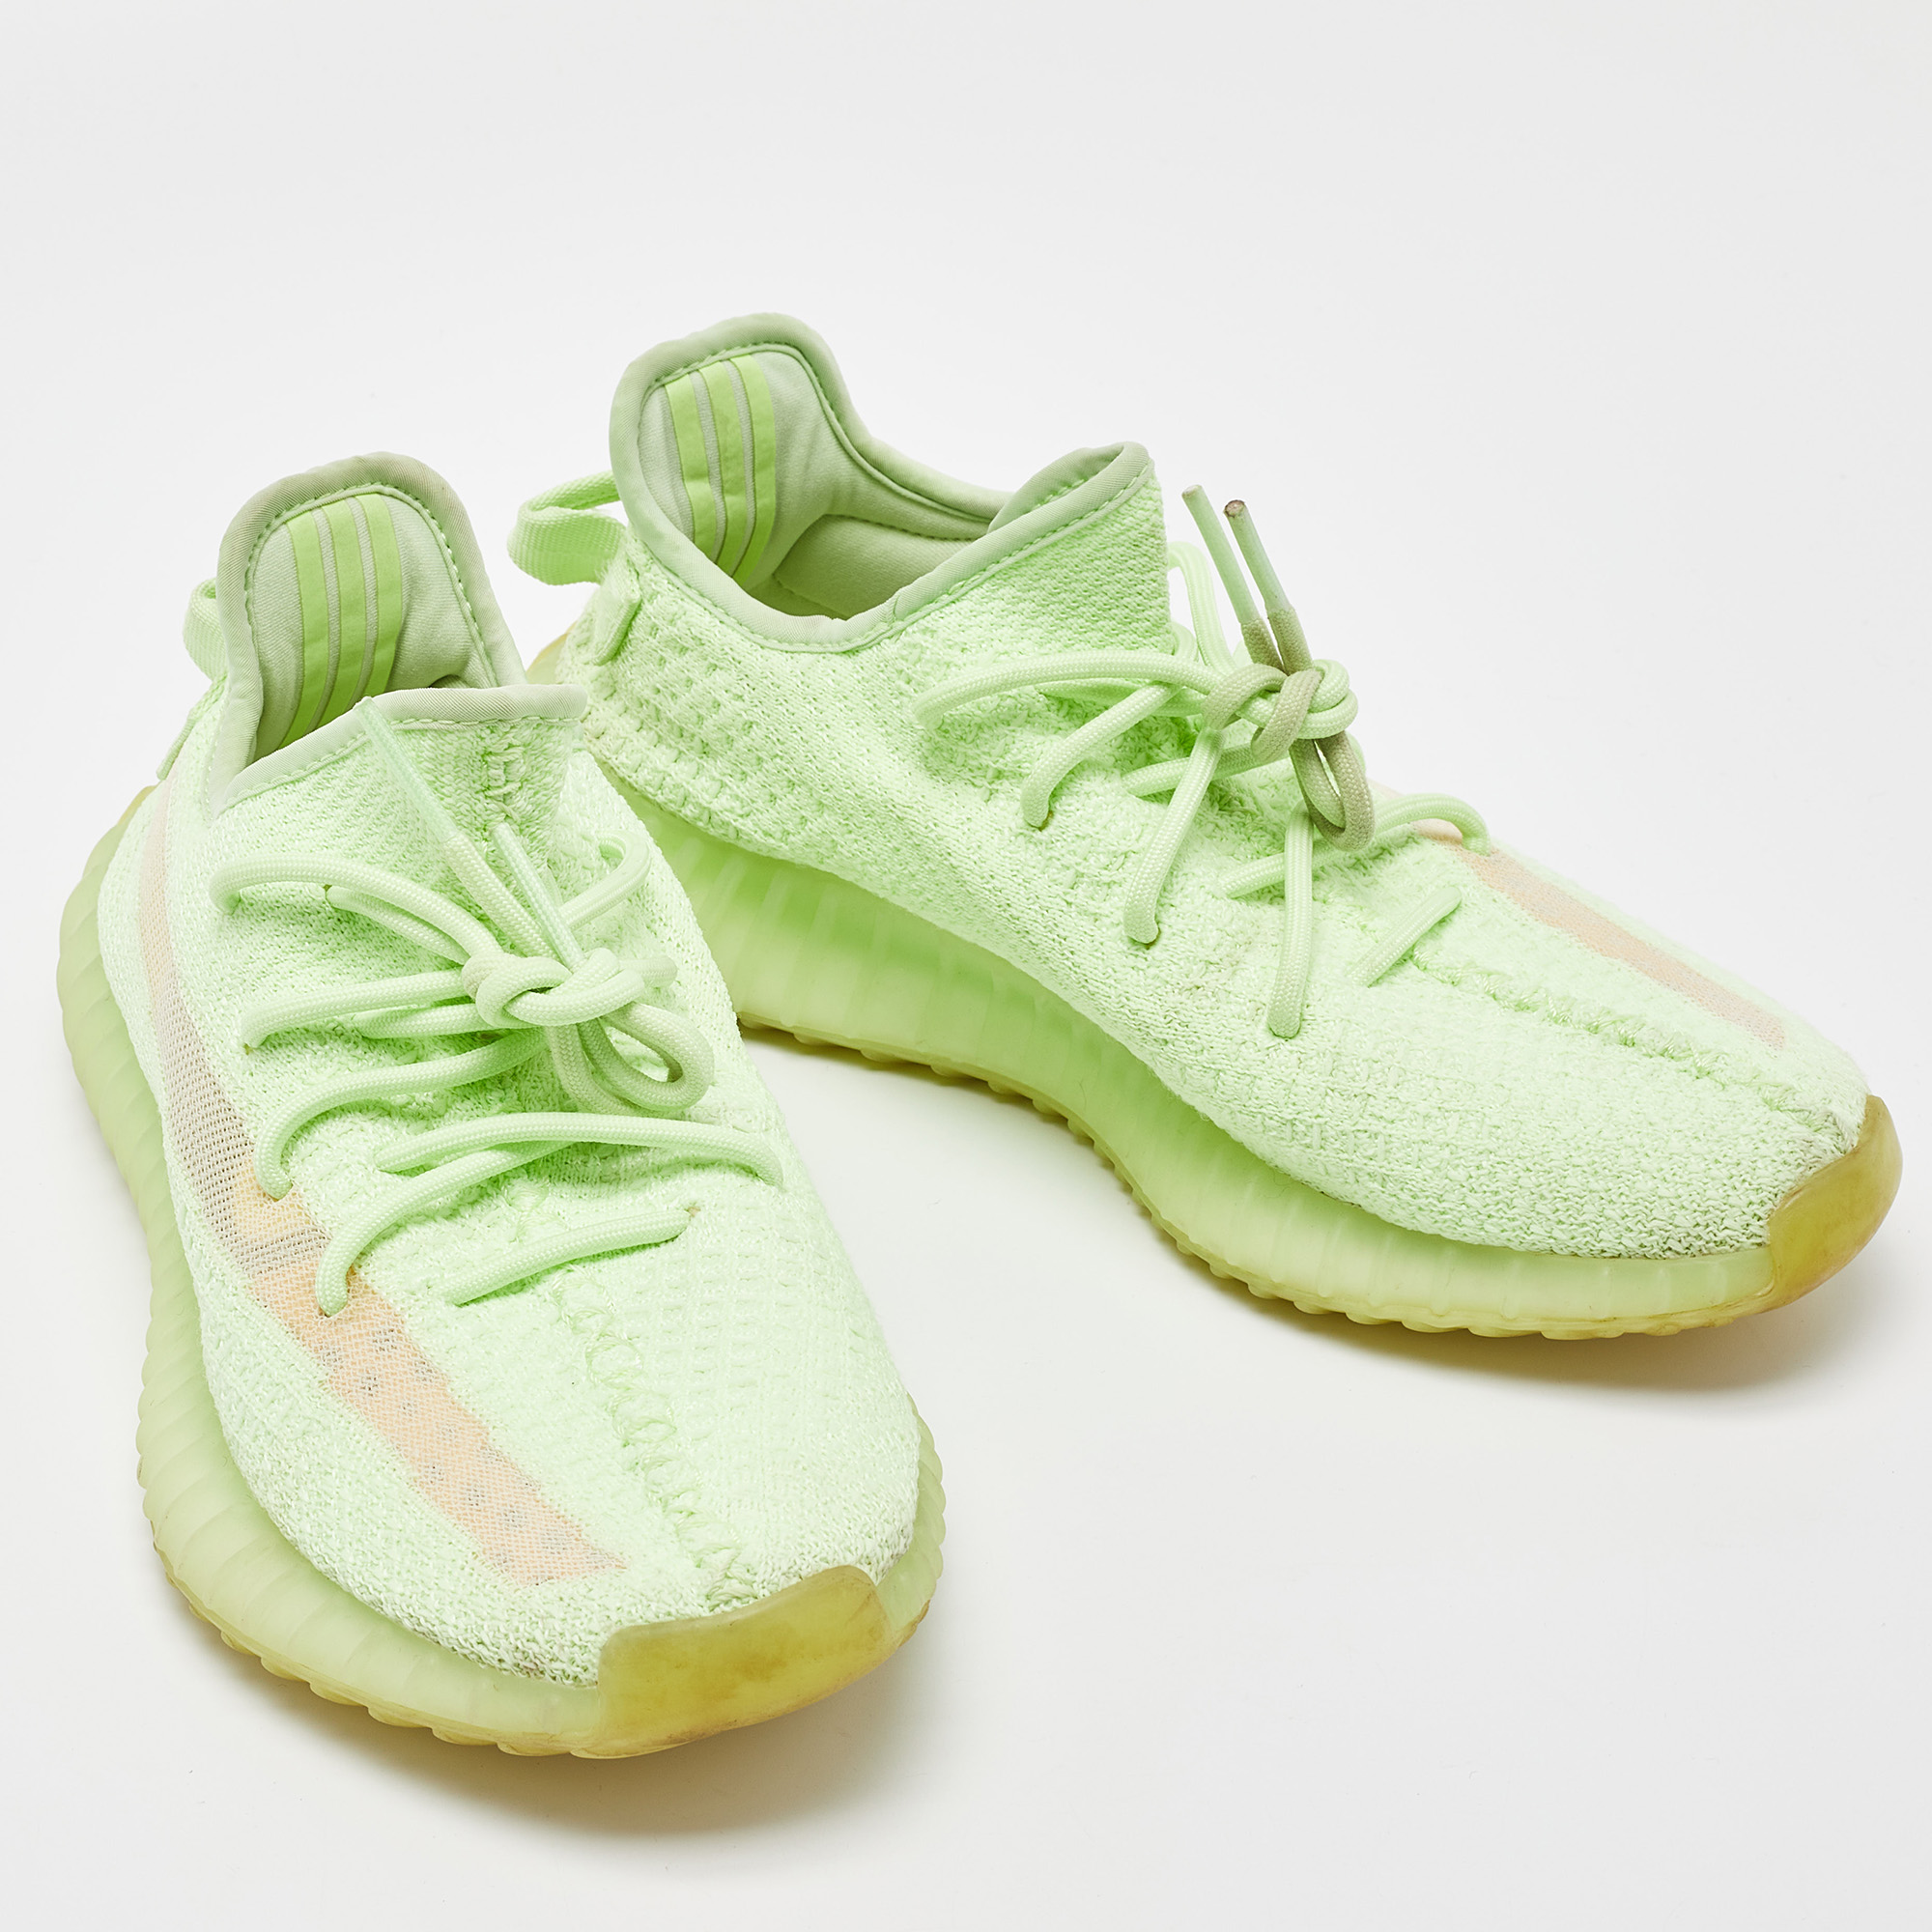 Yeezy X Adidas Green Knit Fabric Boost 350 V2 GID' Glow Sneakers Size 40 2/3